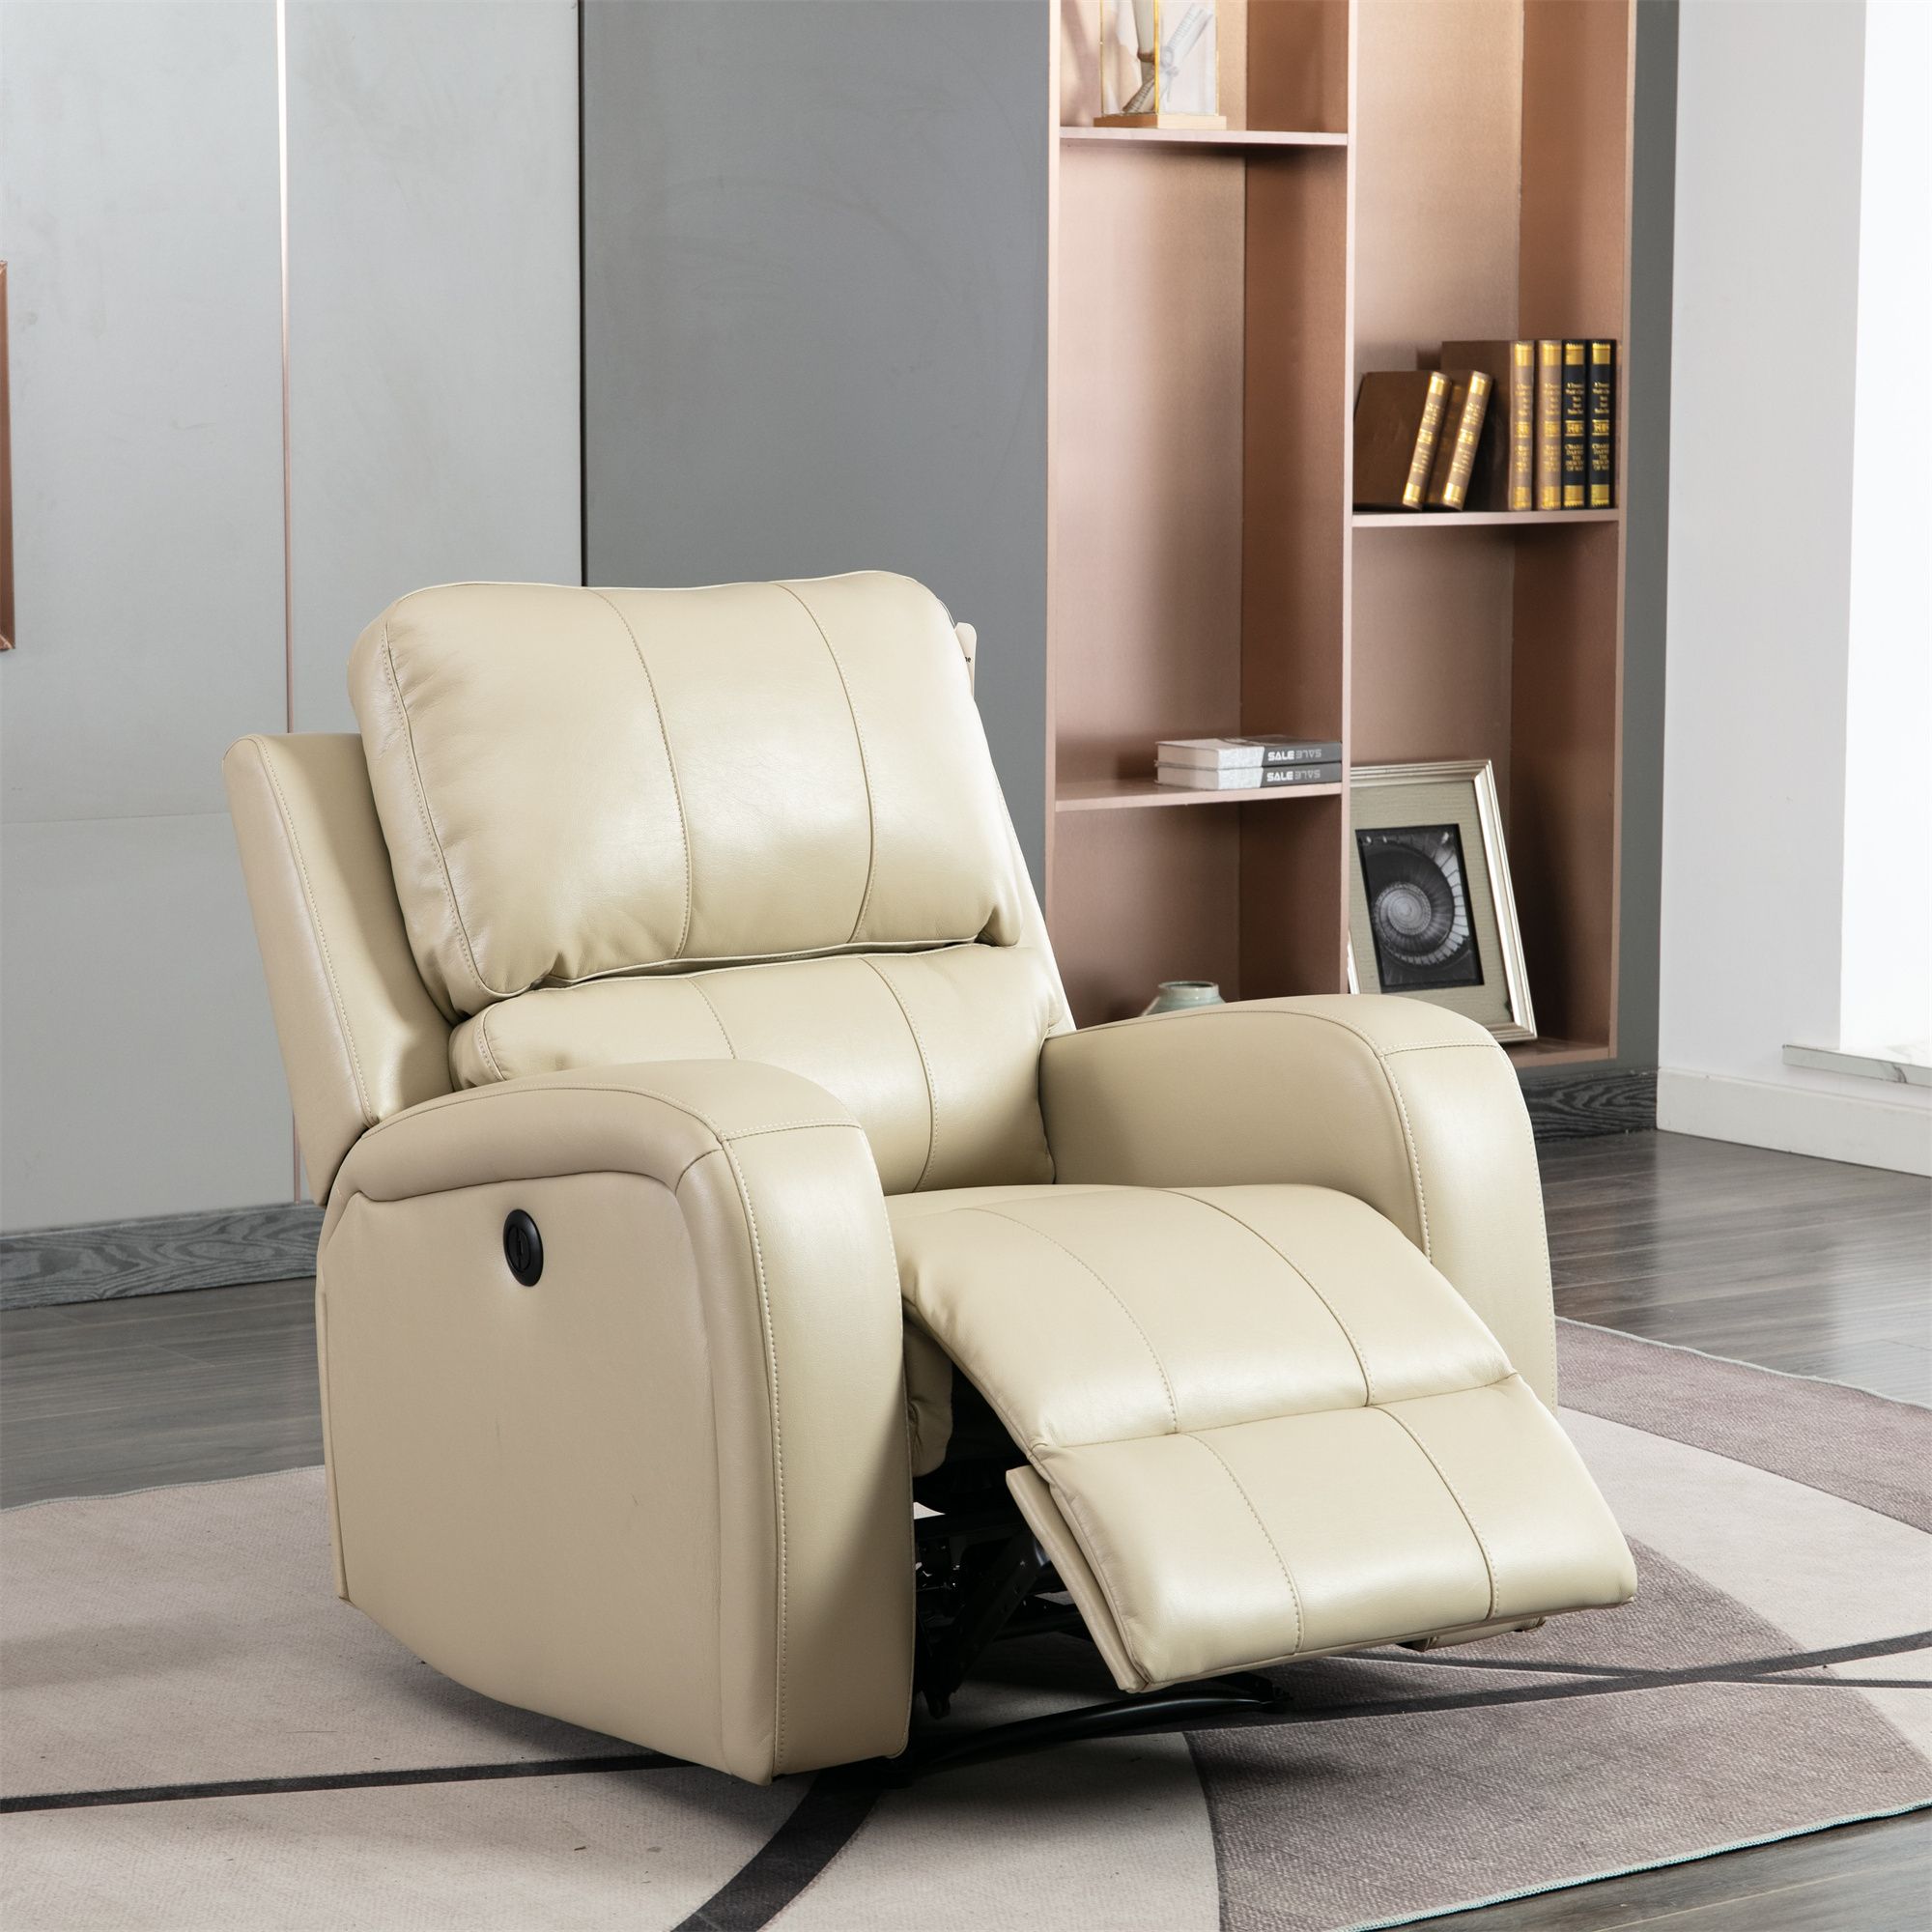 Power Lift Chair Electric Recliner Sofa For Elderly,comfortable Air With Regard To Black Faux Leather Usb Charging Ottomans (View 7 of 20)